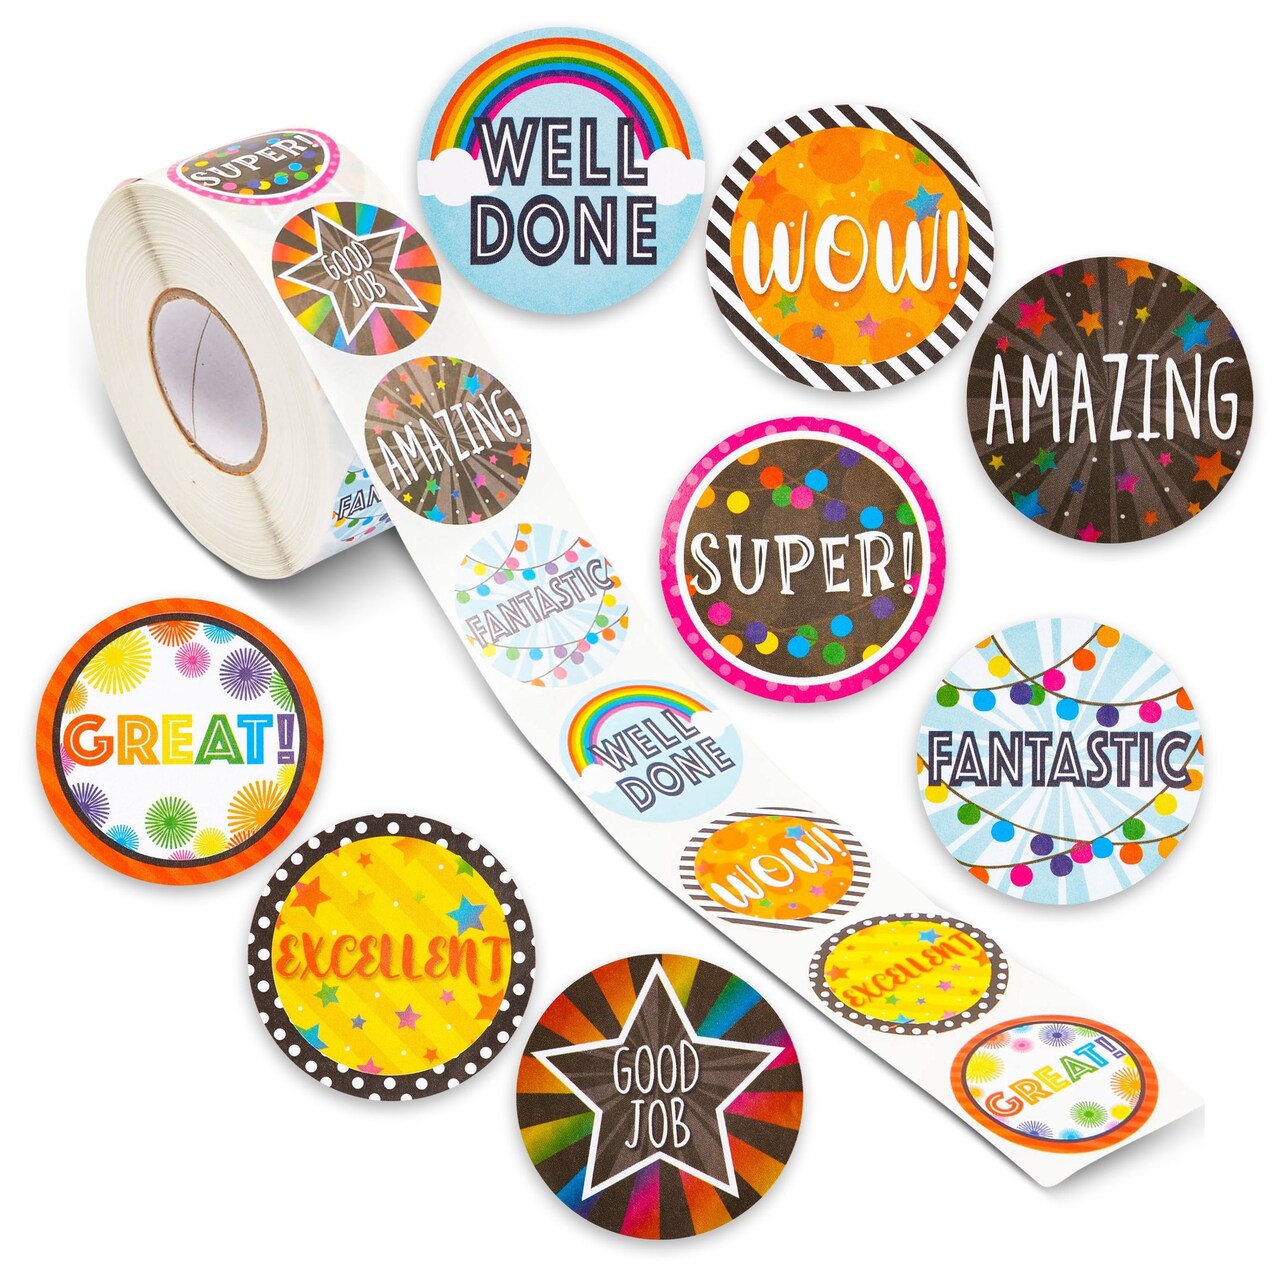 1000 Pieces Motivational Classroom Reward Stickers for Kids, Student Awards, Teachers Supplies (1.5 Inches)